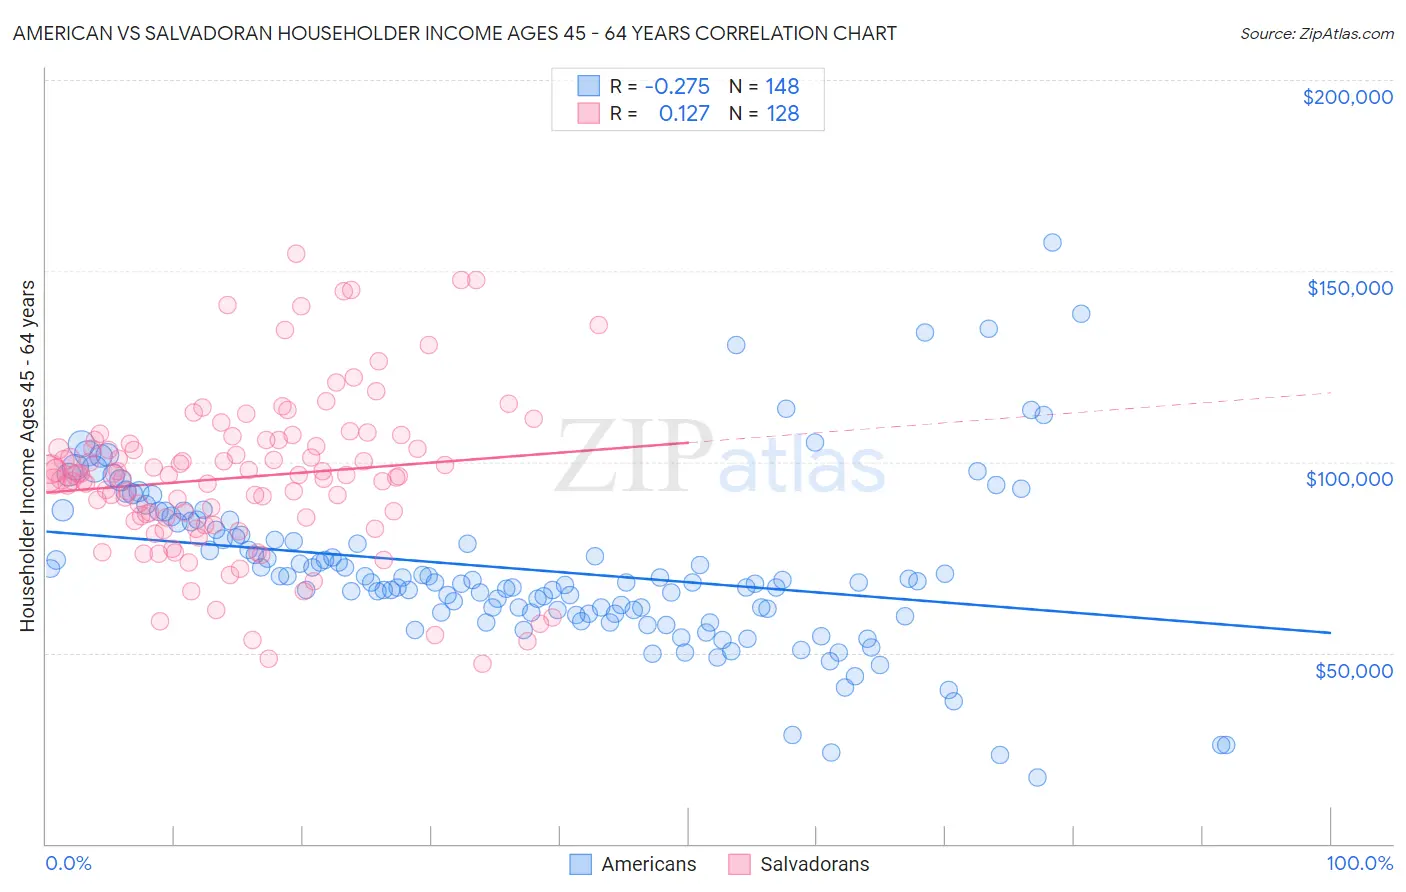 American vs Salvadoran Householder Income Ages 45 - 64 years